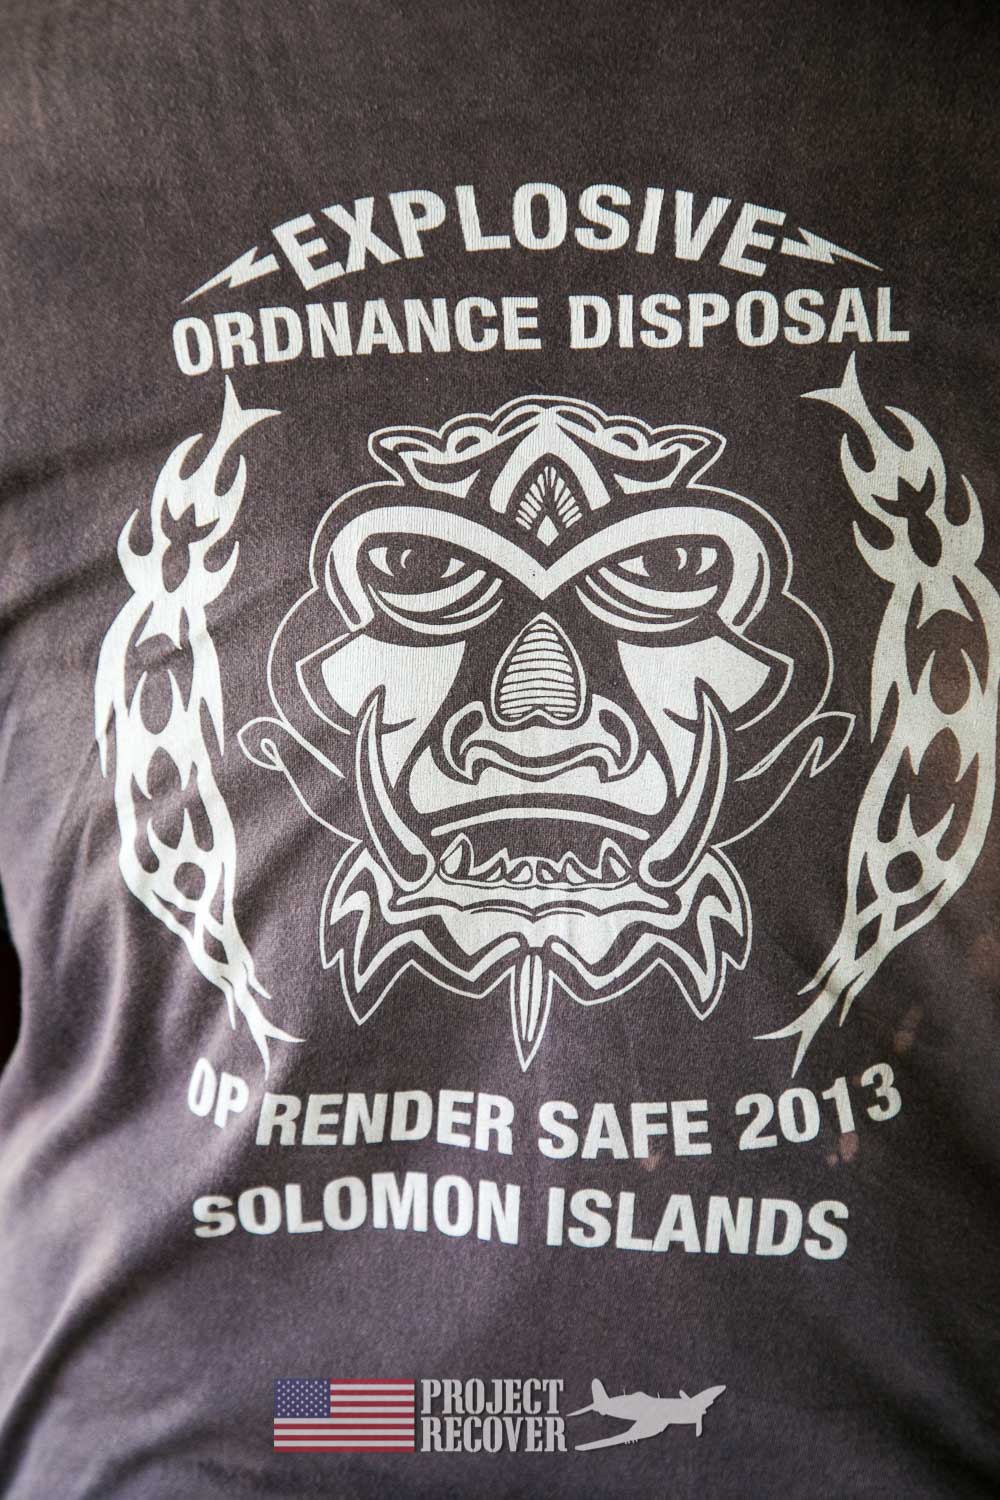 Team TShirt Honiara EOD - Hells Point - Nose gunners view Japanese WWII bomber - Vilu War Museum - Honiara - while looking to find Solomon Islands MIAs - Project Recover and BentProp Project are committed to bringing the MIA home. Photos by Harry Parker Photography.com